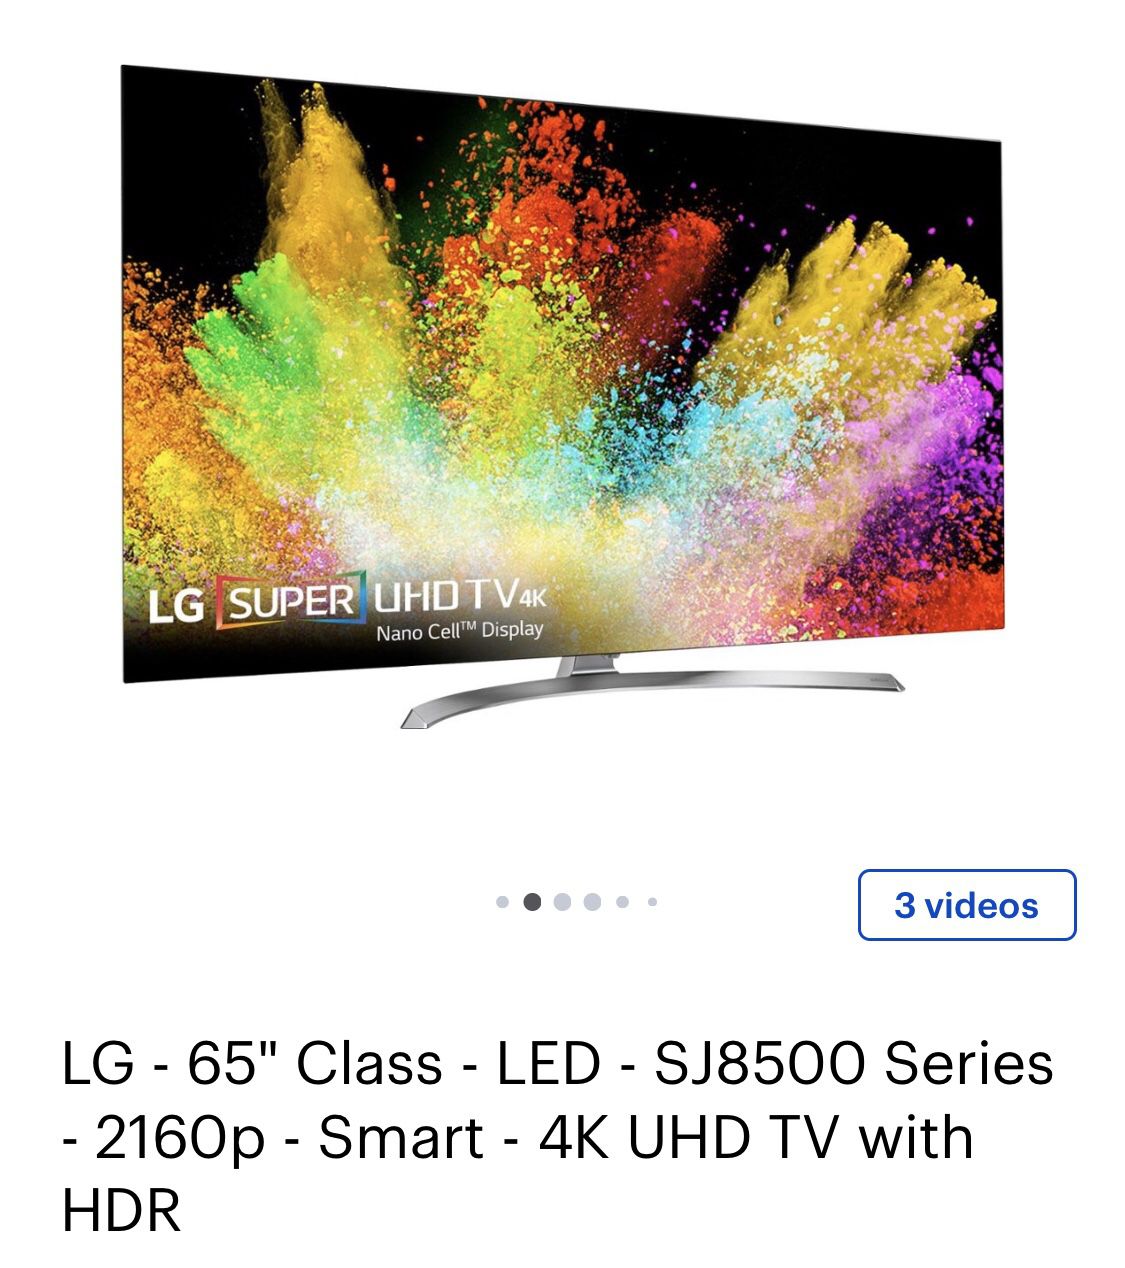 LG- 65” inch TV 4k UHD with HDR -SJ8500